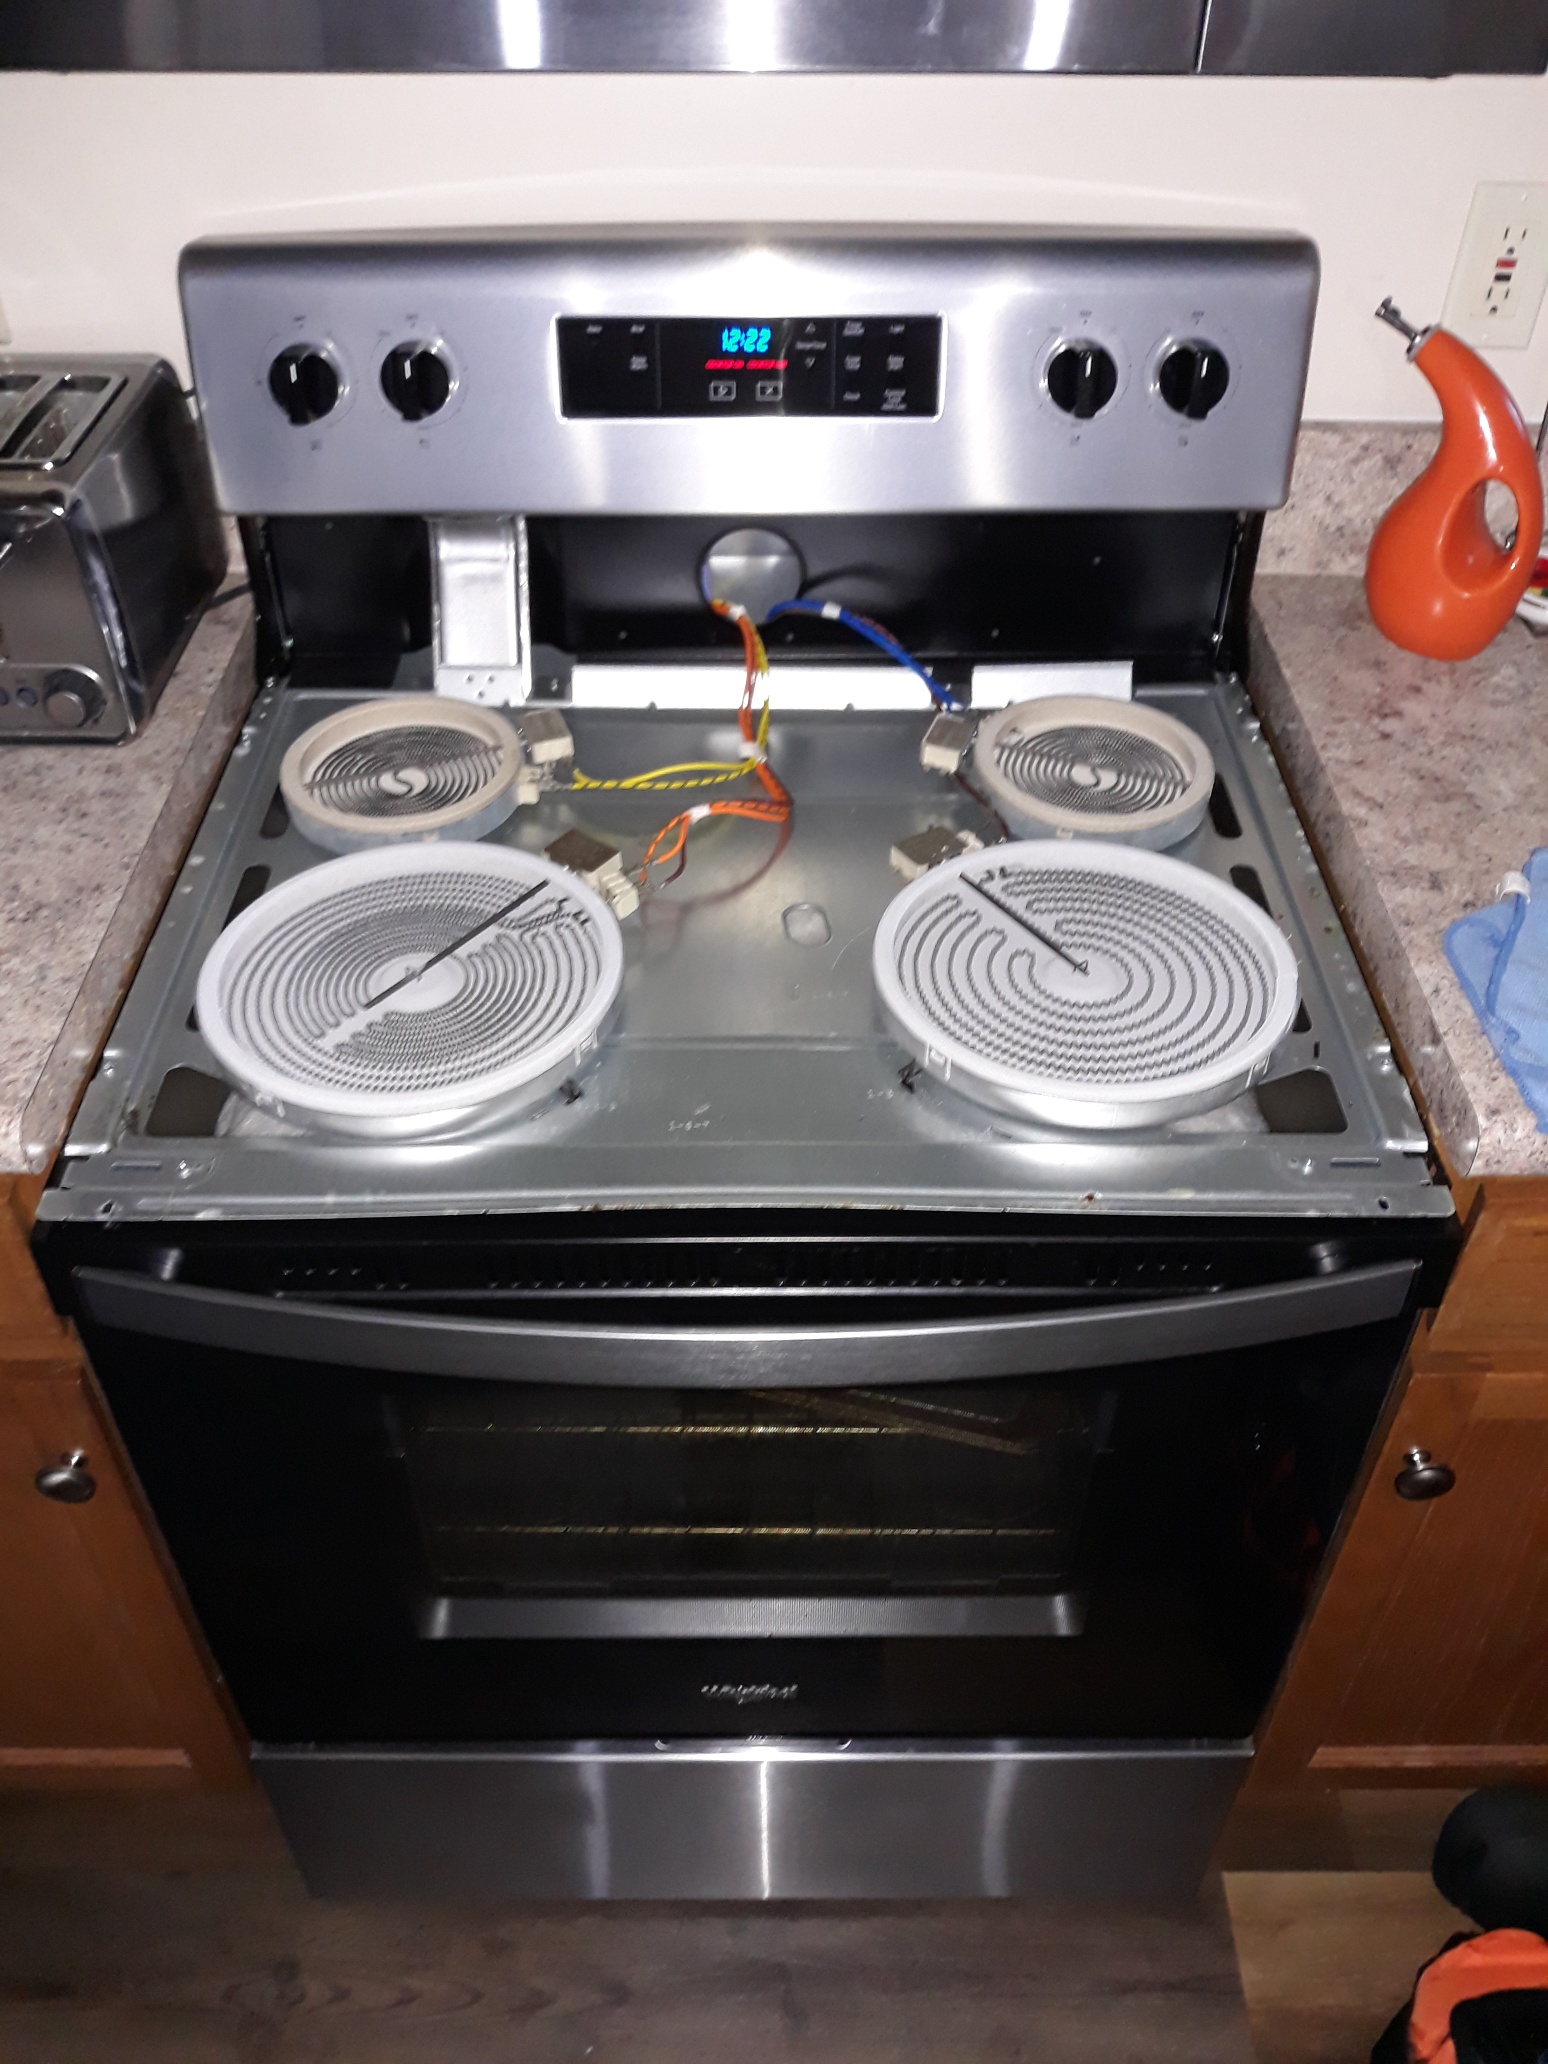 appliance repair oven cooktop repair repair require replacement of the failed element control switch with a closed circuit lakeshore wy s wildwood oxford fl 34484